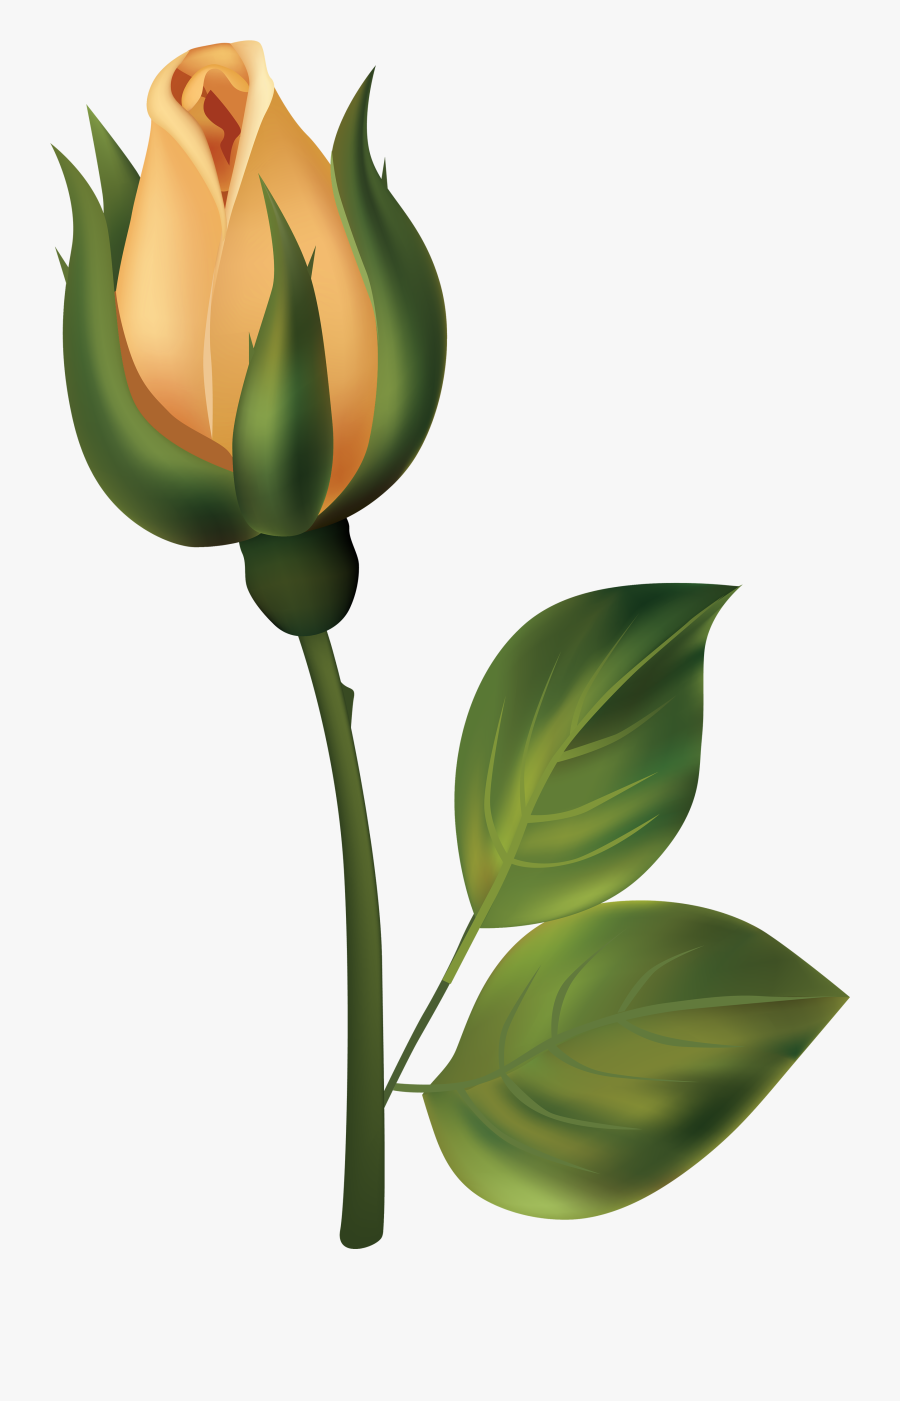 Yellow Rose Bud Png Clipart - Flower Bud Clip Art, Transparent Clipart